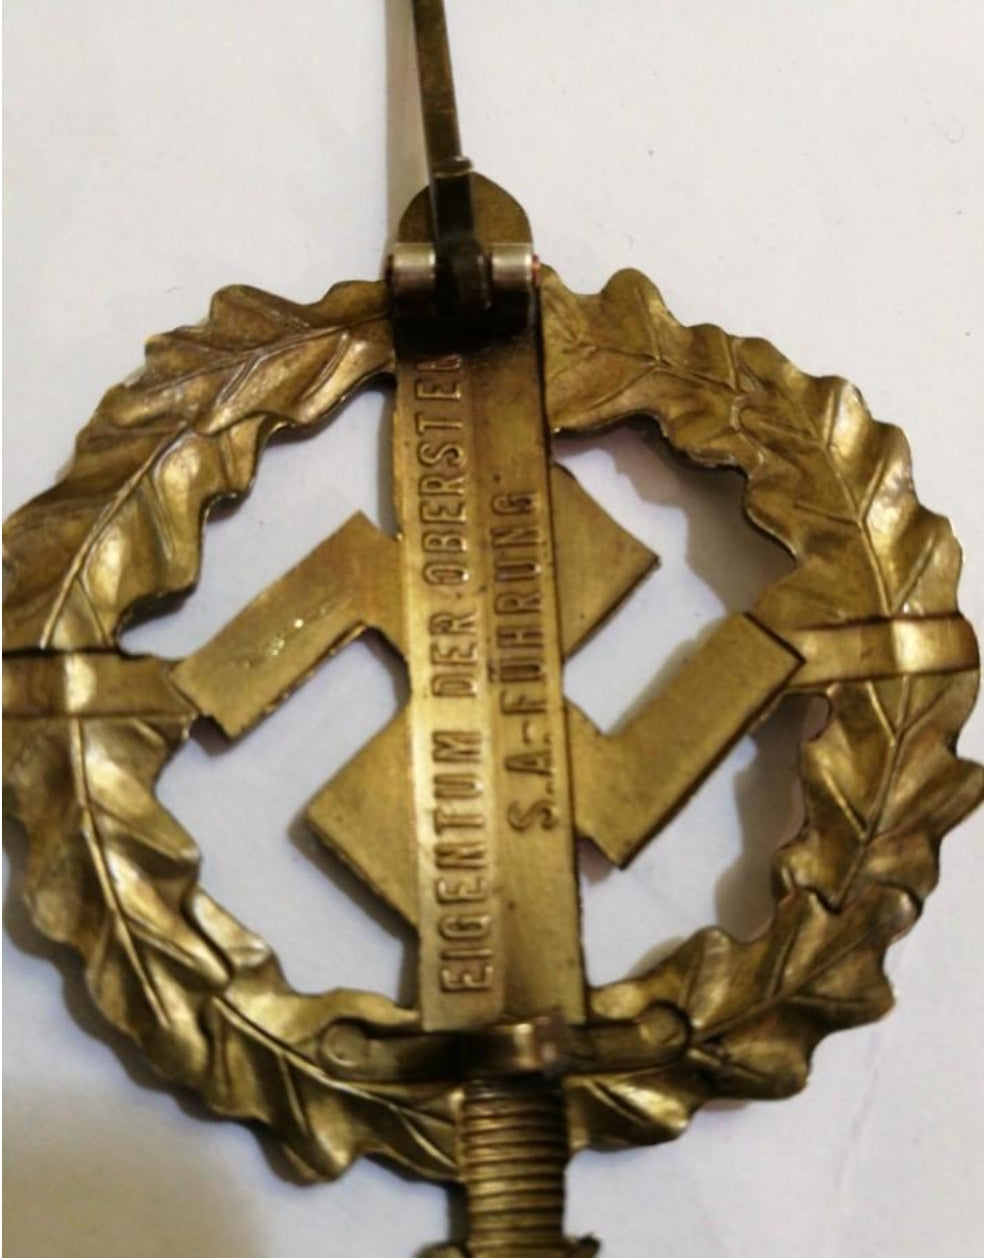 German badge of the S.A. Bronze category